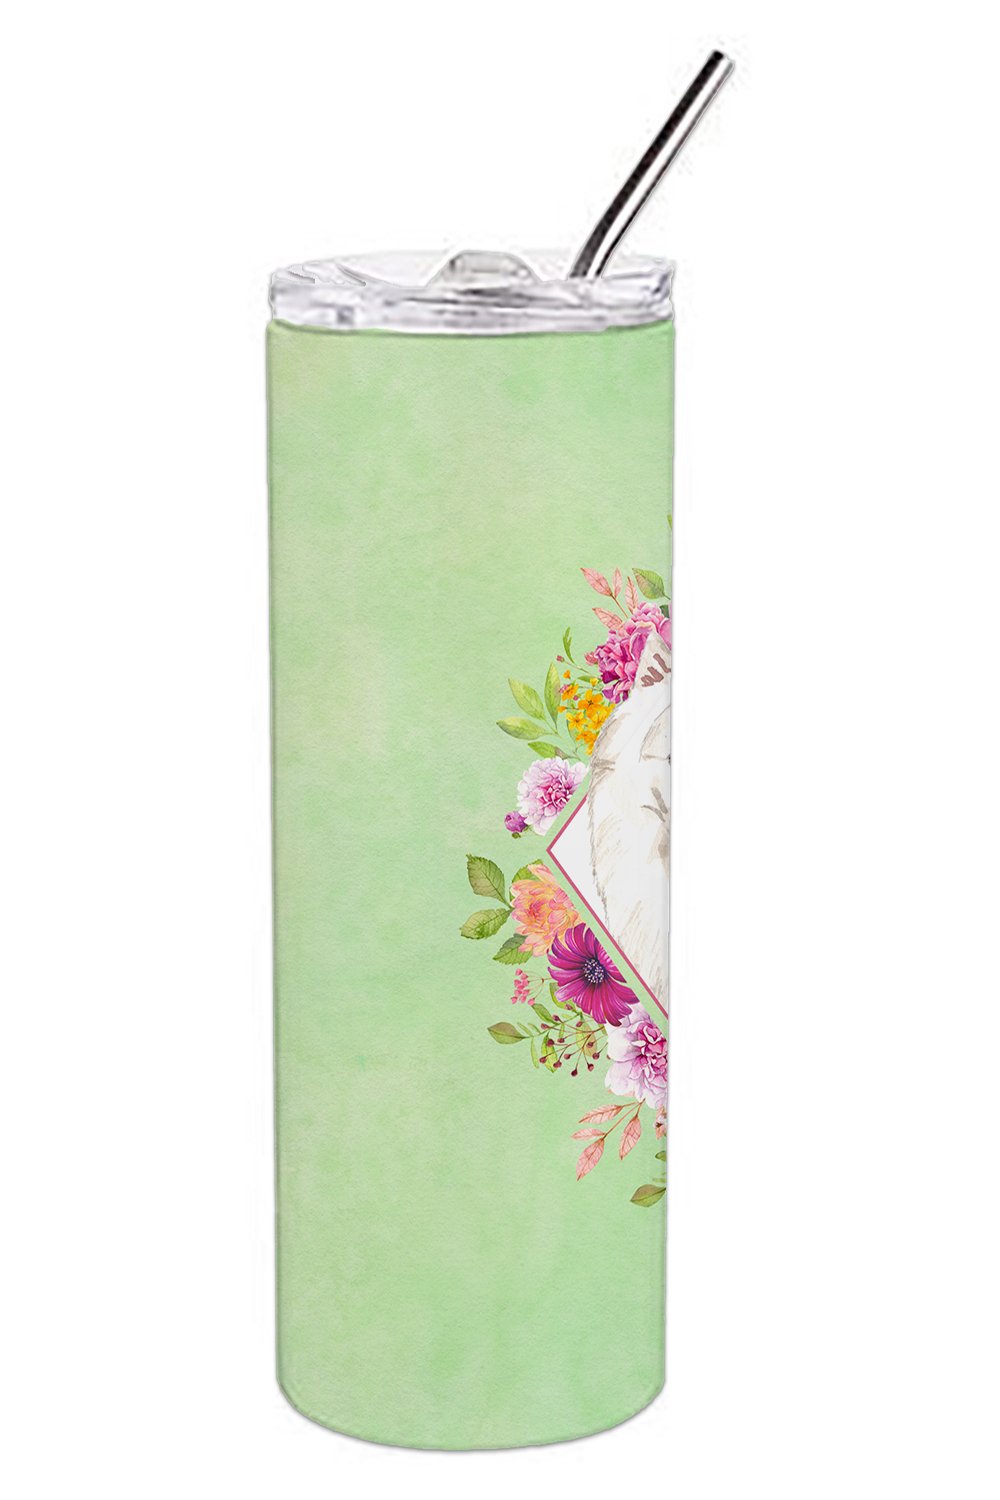 Japanese Spitz Green Flowers Double Walled Stainless Steel 20 oz Skinny Tumbler CK4389TBL20 by Caroline's Treasures